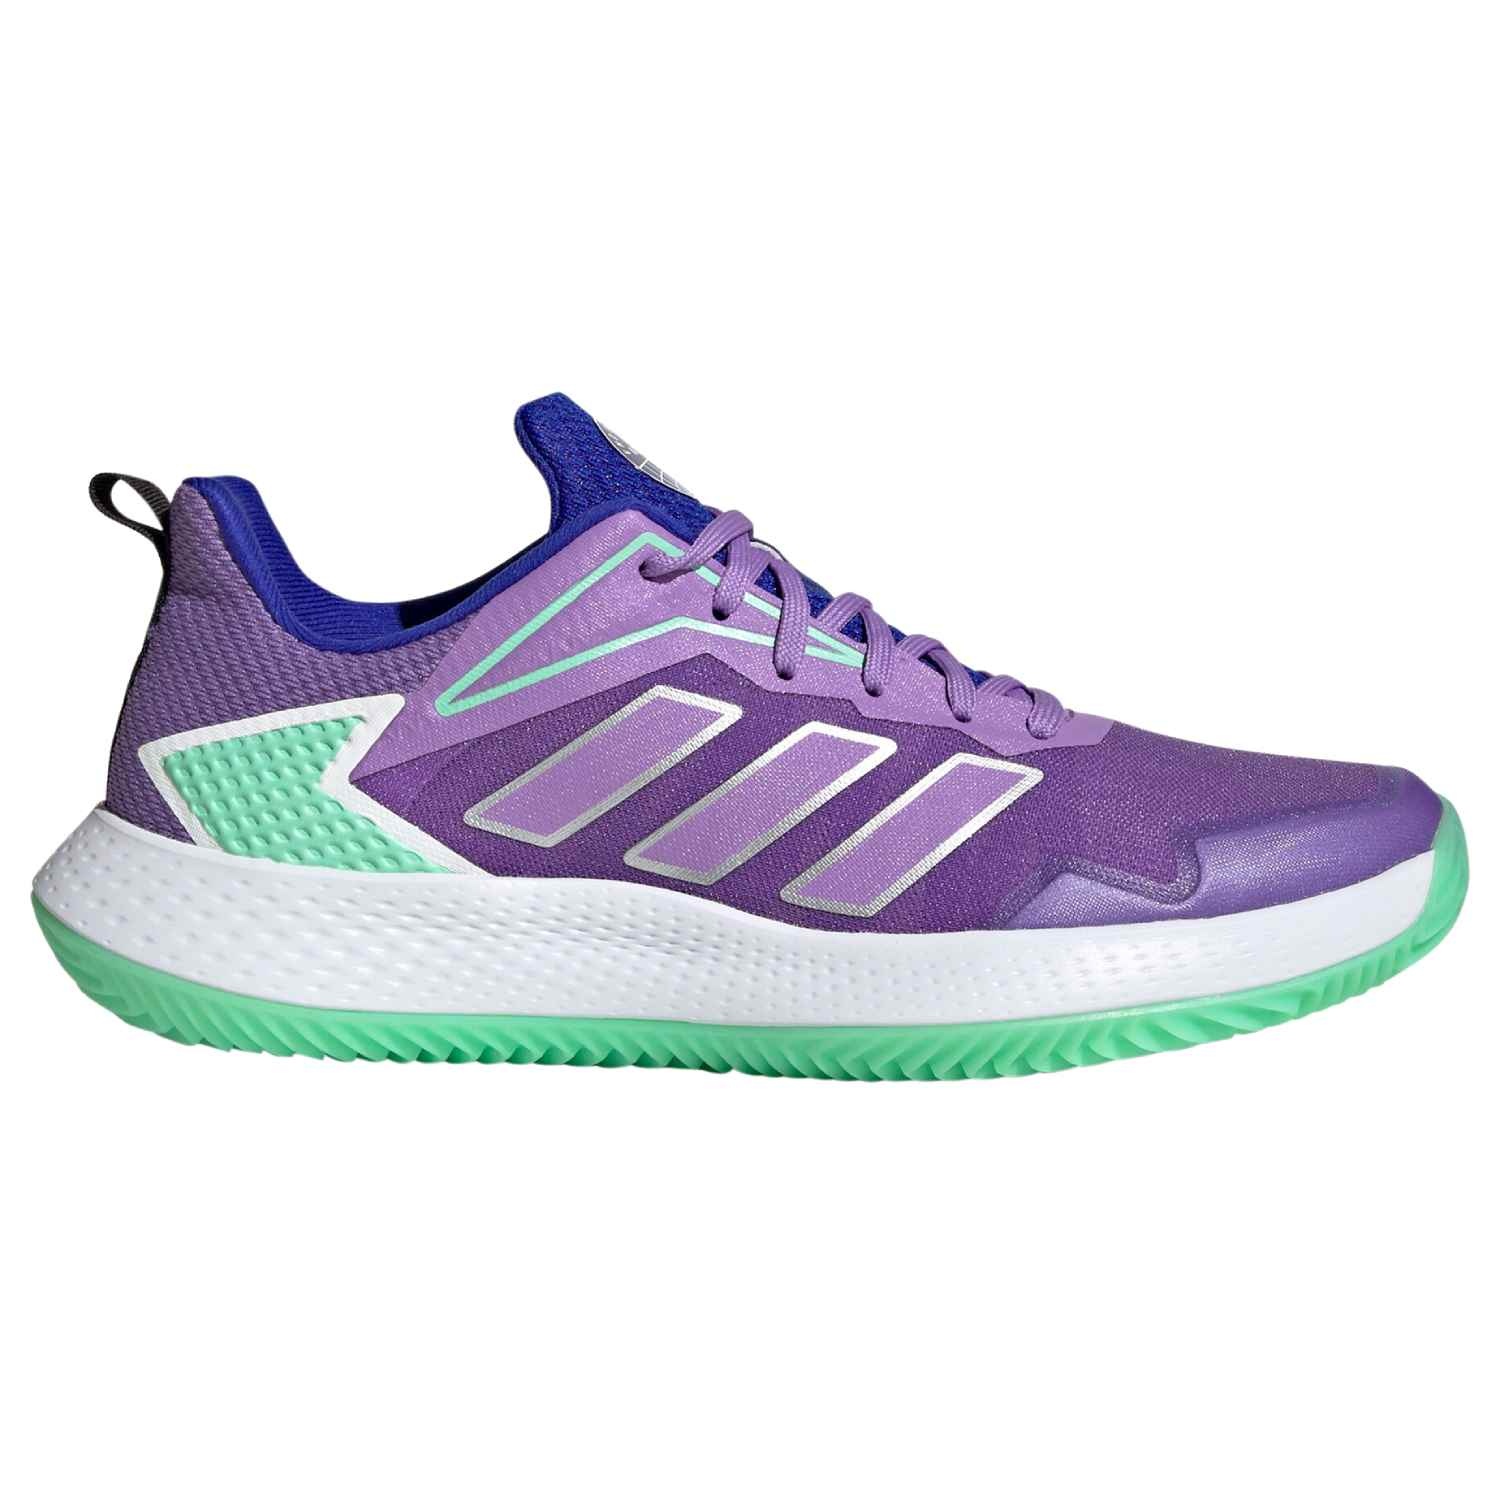 Adidas Defiant Speed Clay Violet/Mint